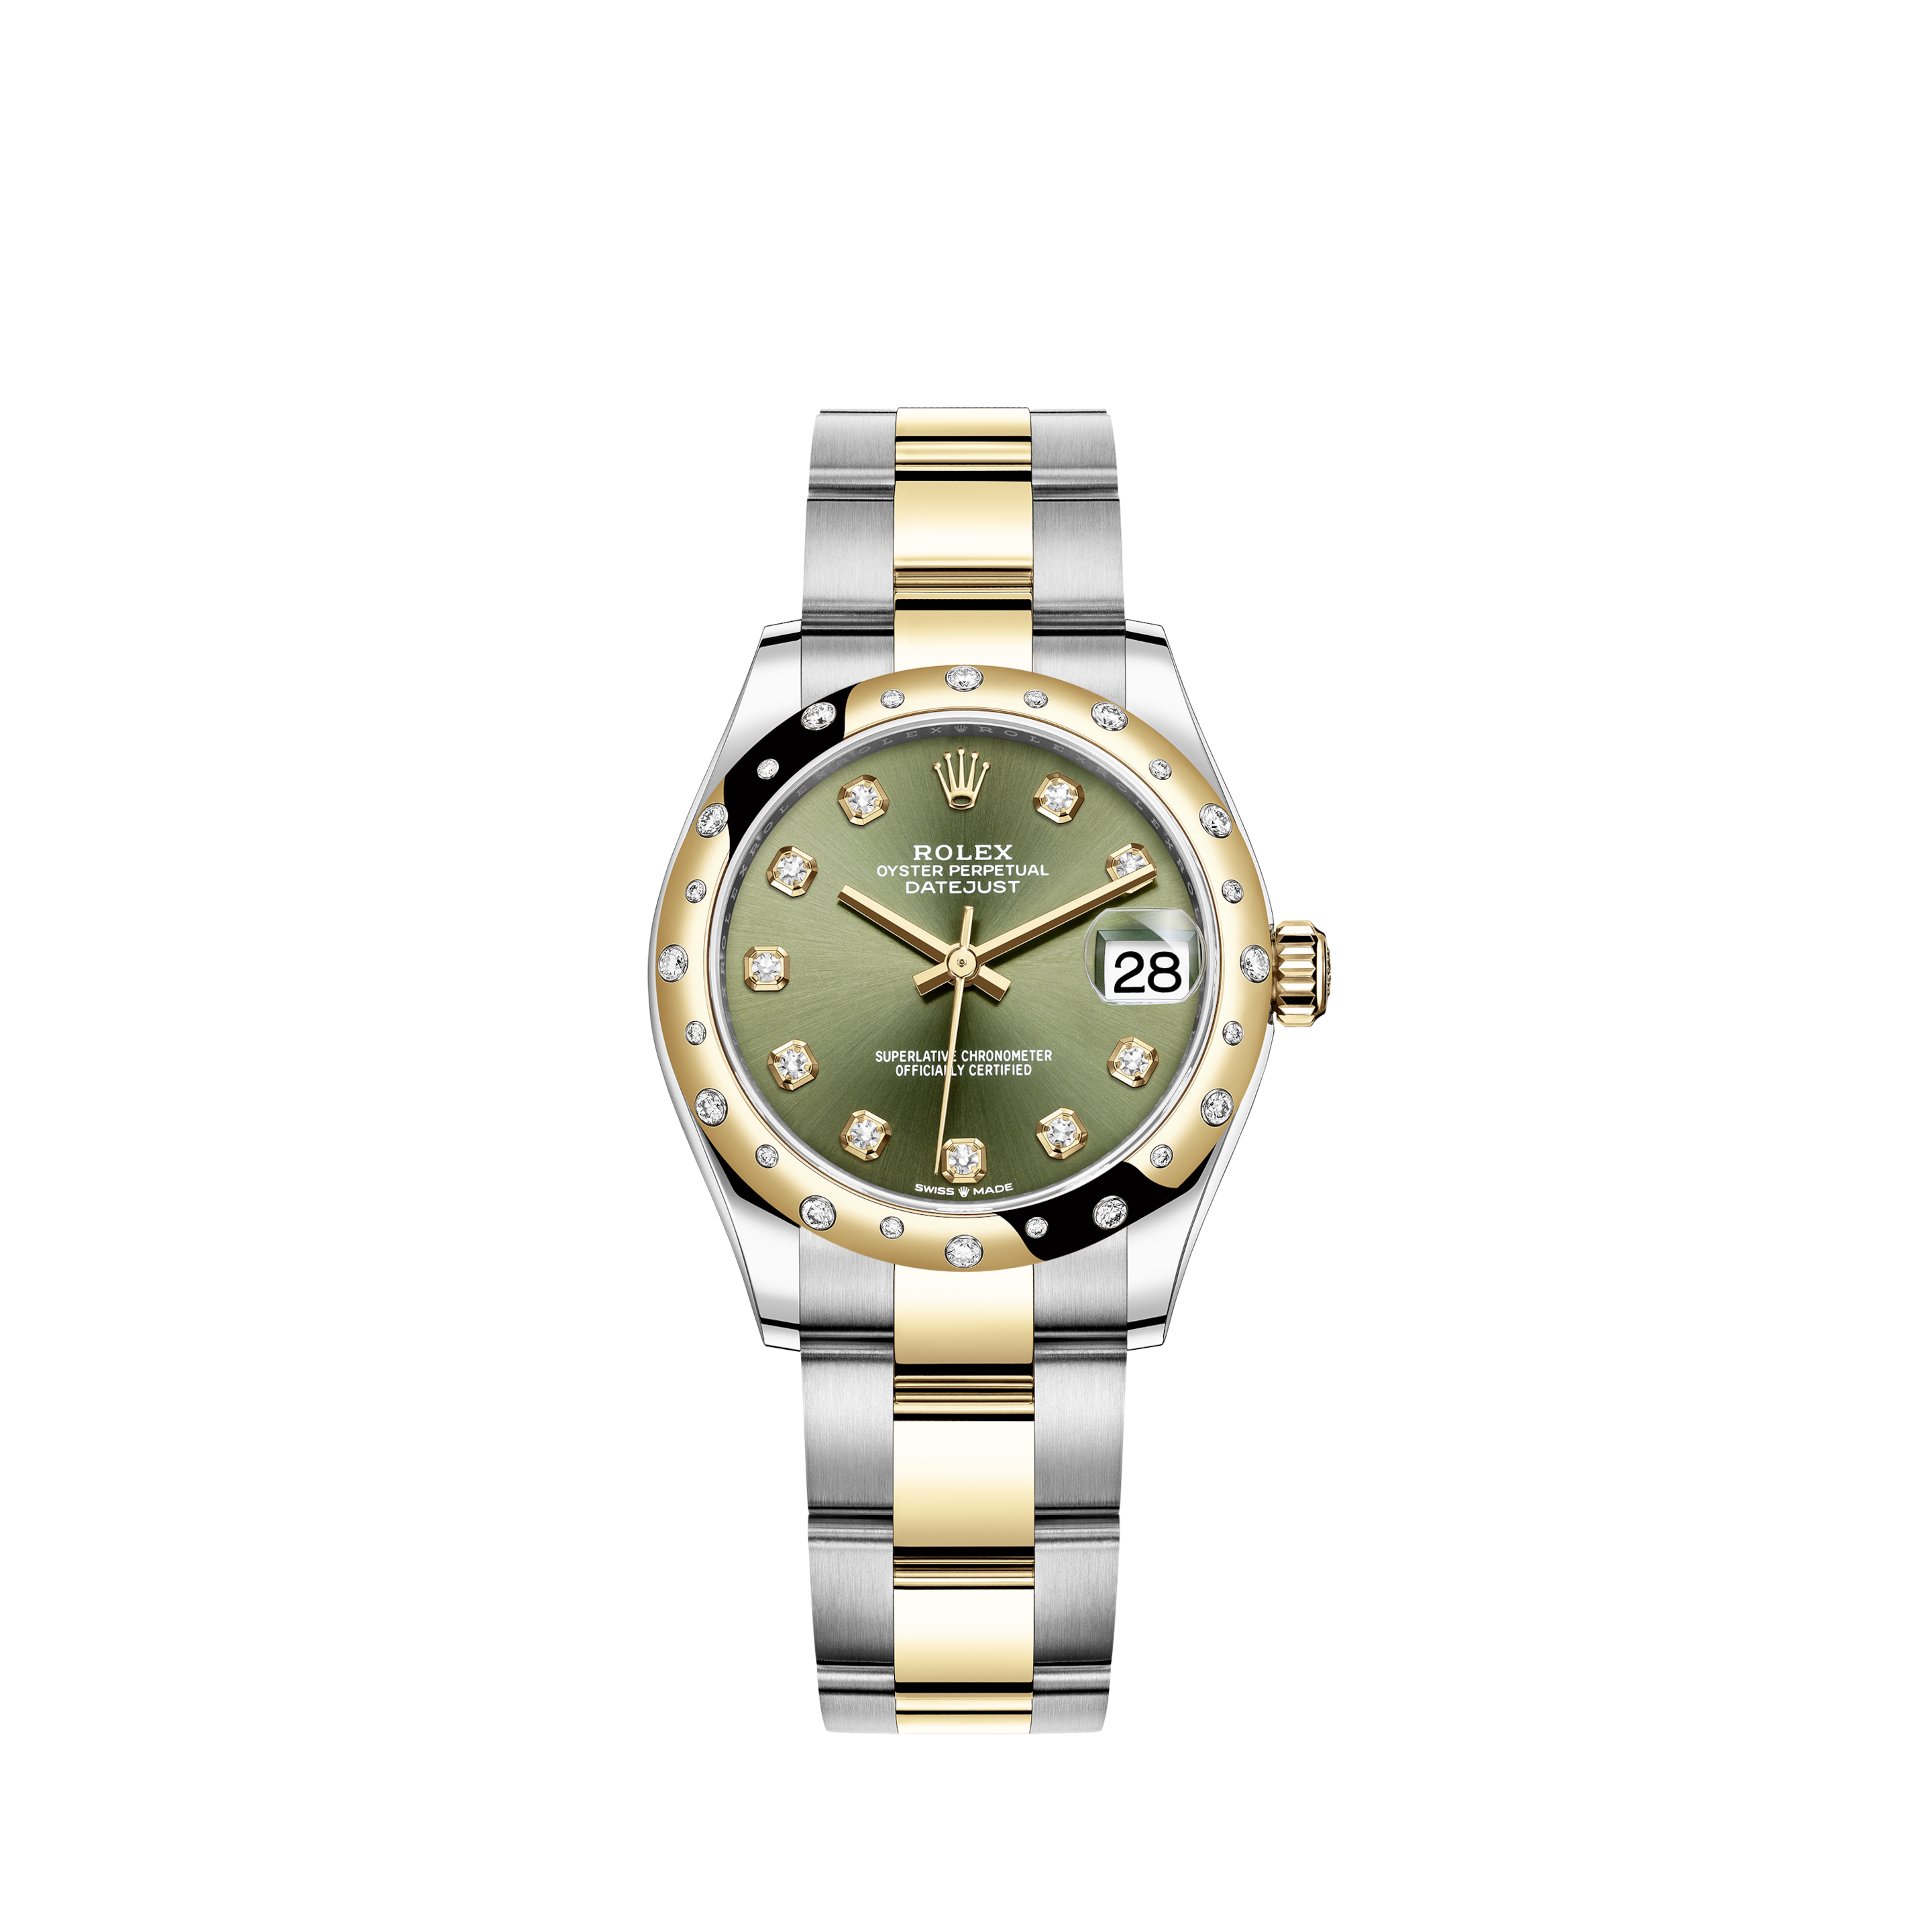 Rolex Lady Datejust 28mm Stainless Steel and Yellow Gold 279163 Silver 17 Diamond OysterRolex Lady Datejust 28mm Stainless Steel and Yellow Gold 279163 Silver Diamond Jubilee